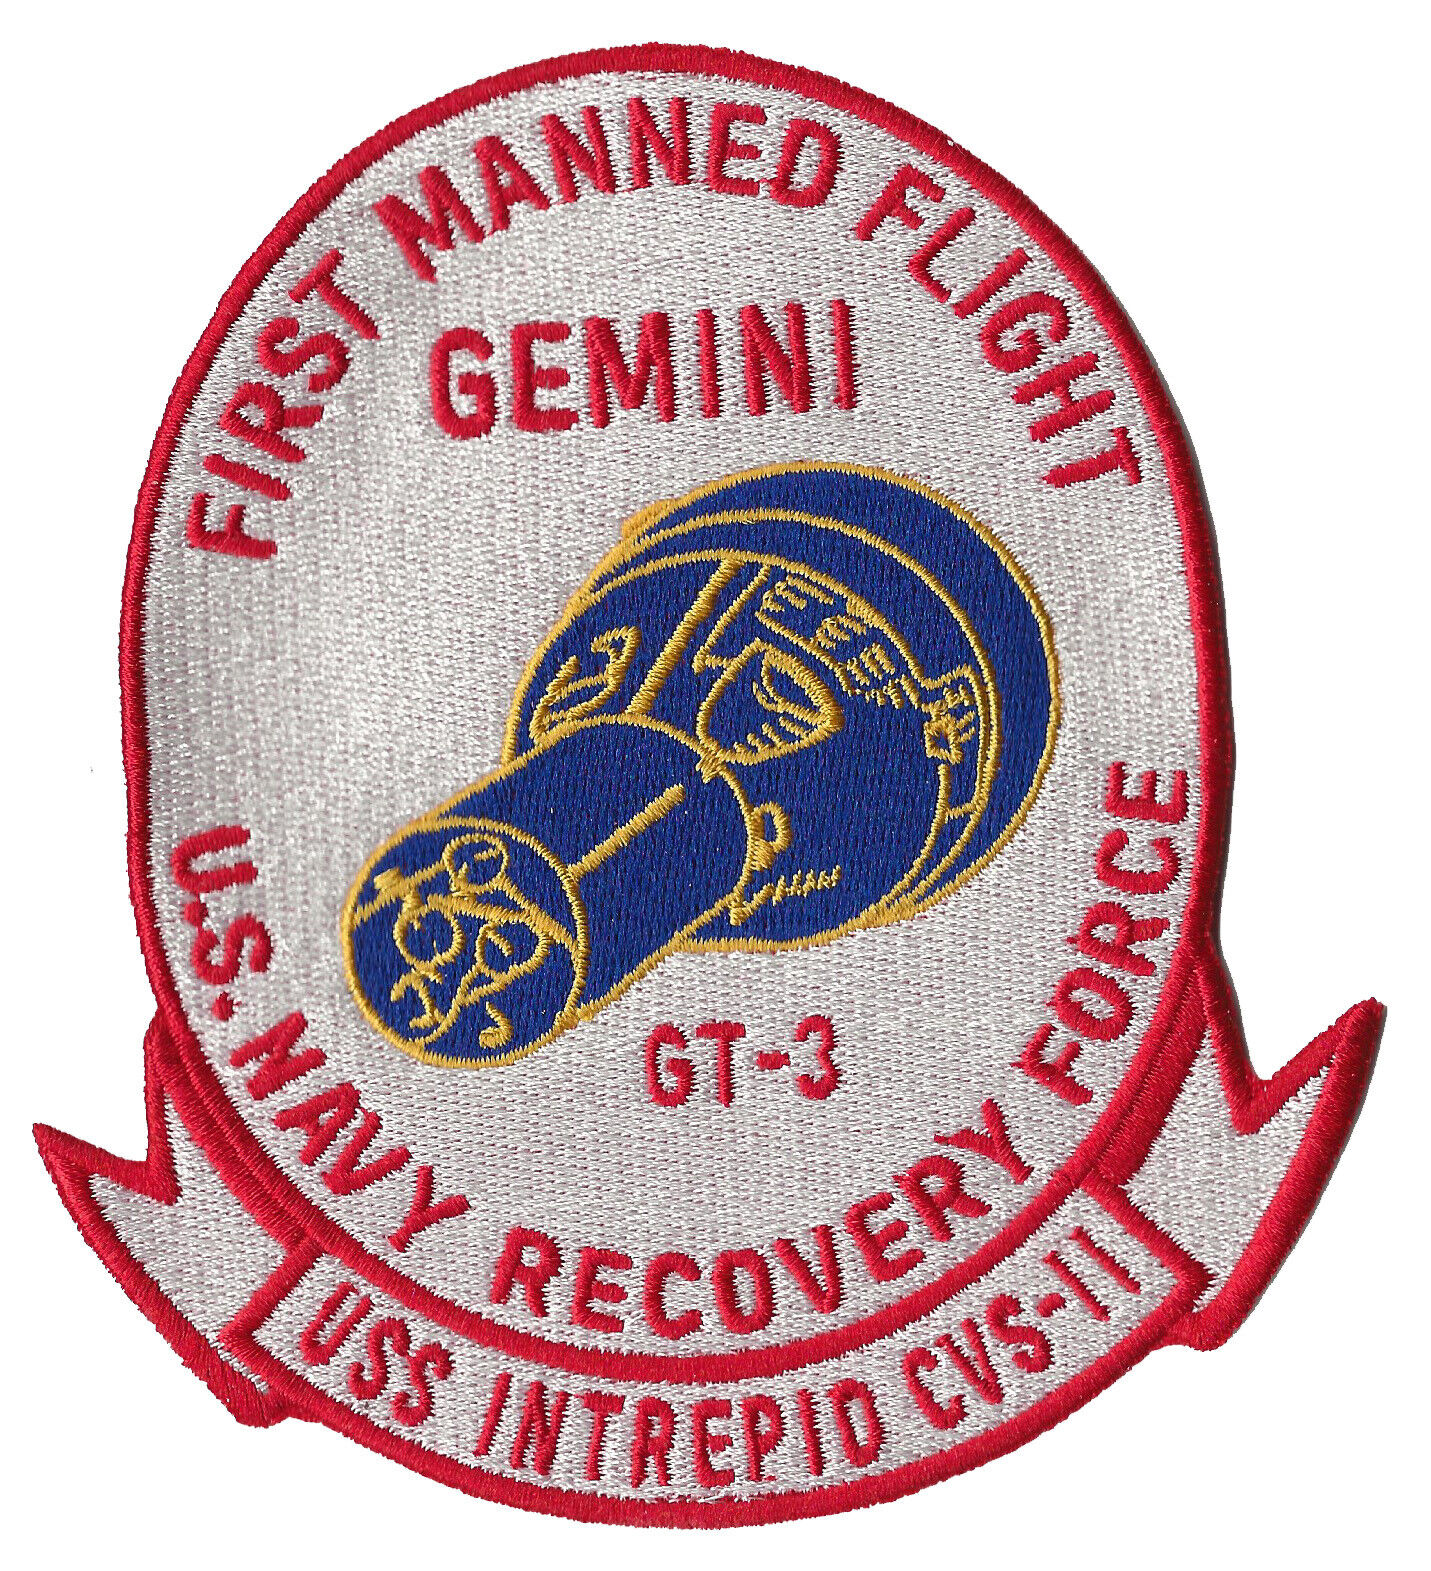 NASA Gemini 3 USS Intrepid CVS-11 US Navy ship space recovery force patch